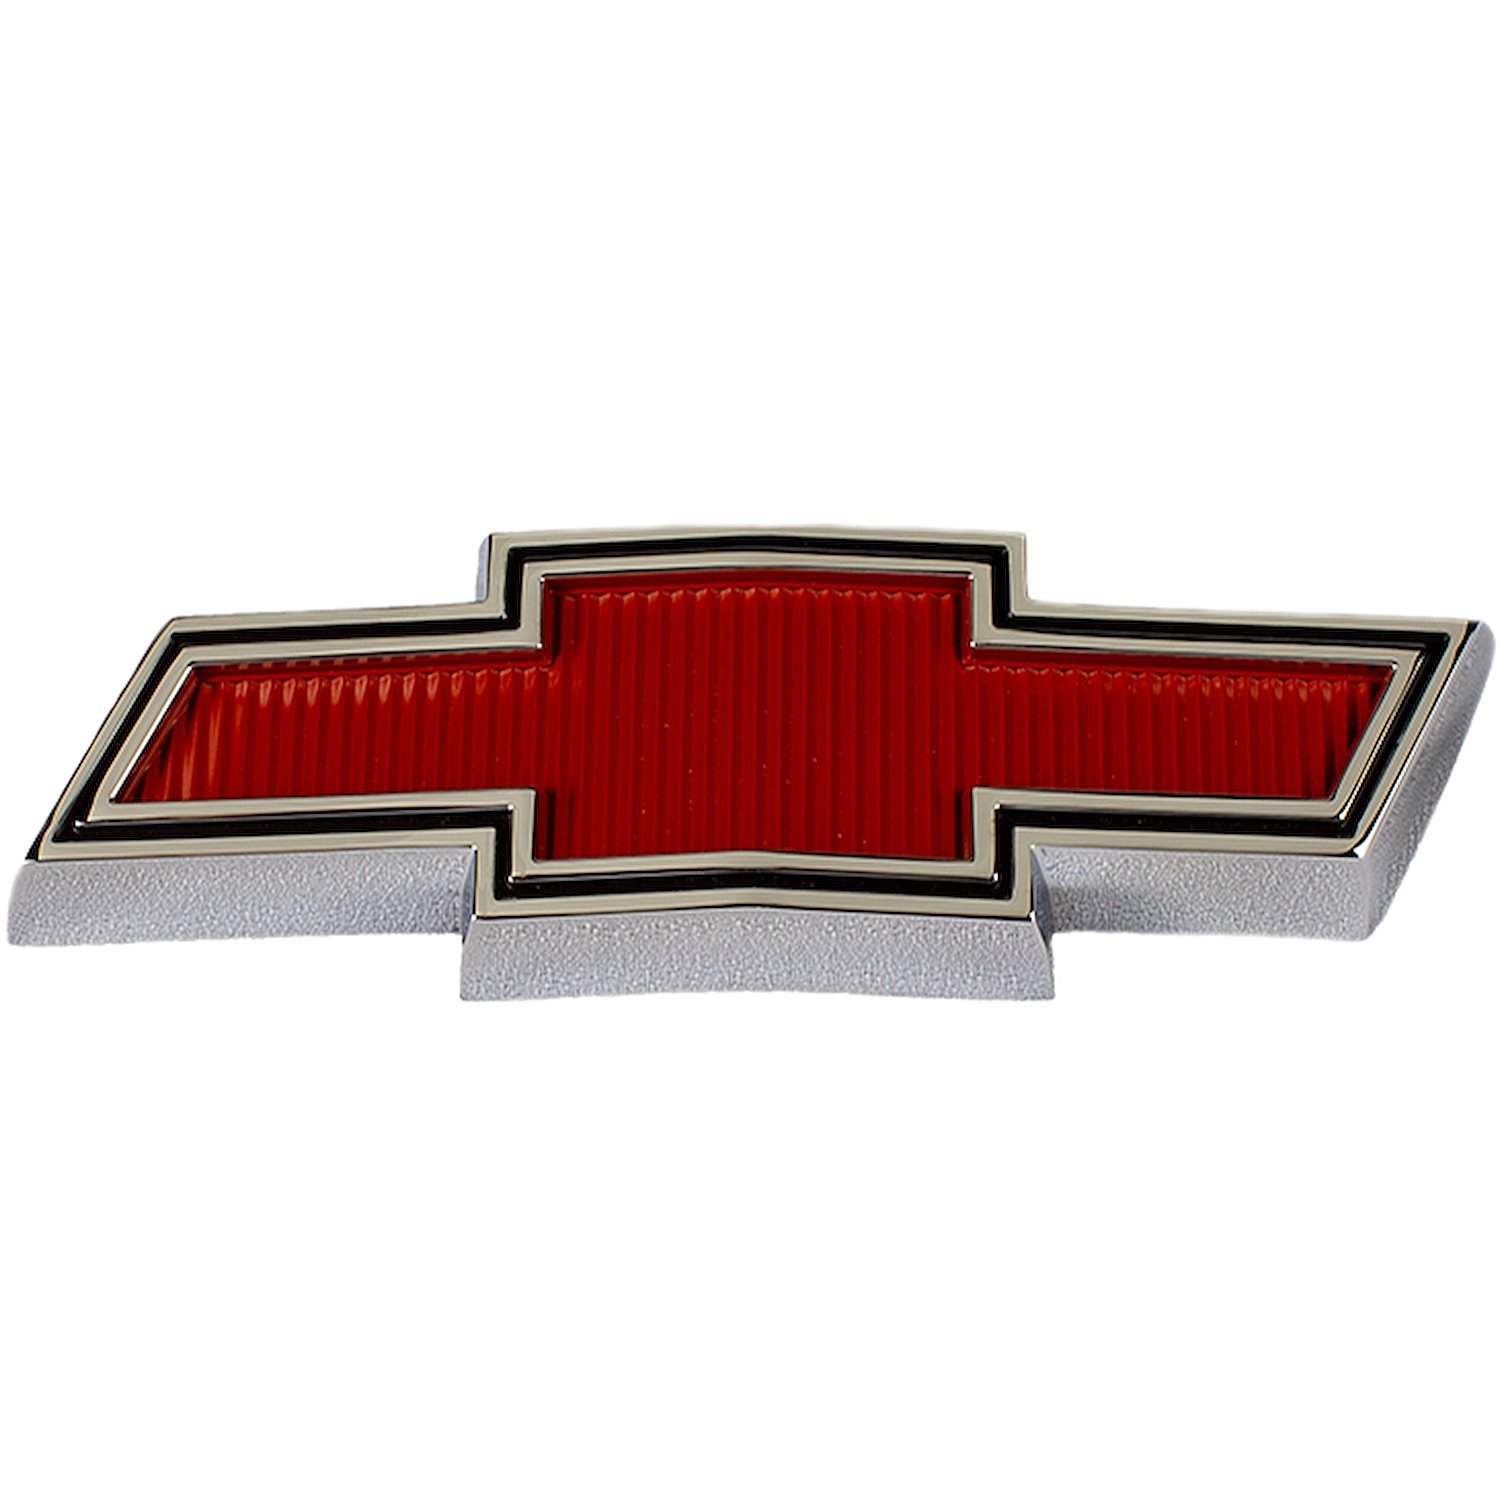 Bow Tie Grille Emblem for 1967-1968 Chevy Truck, Suburban